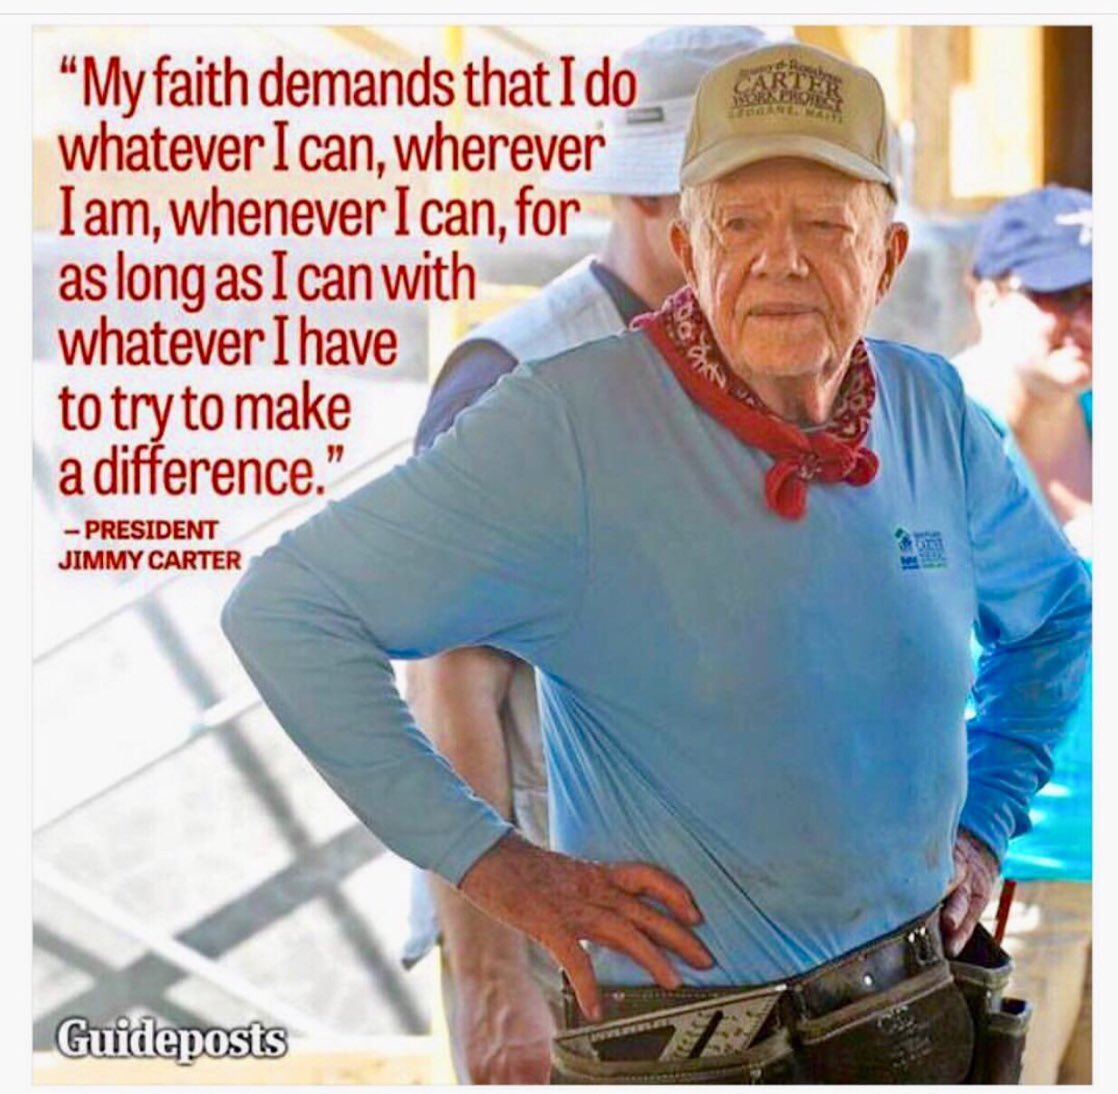 “My faith demands that I do whatever I can....”